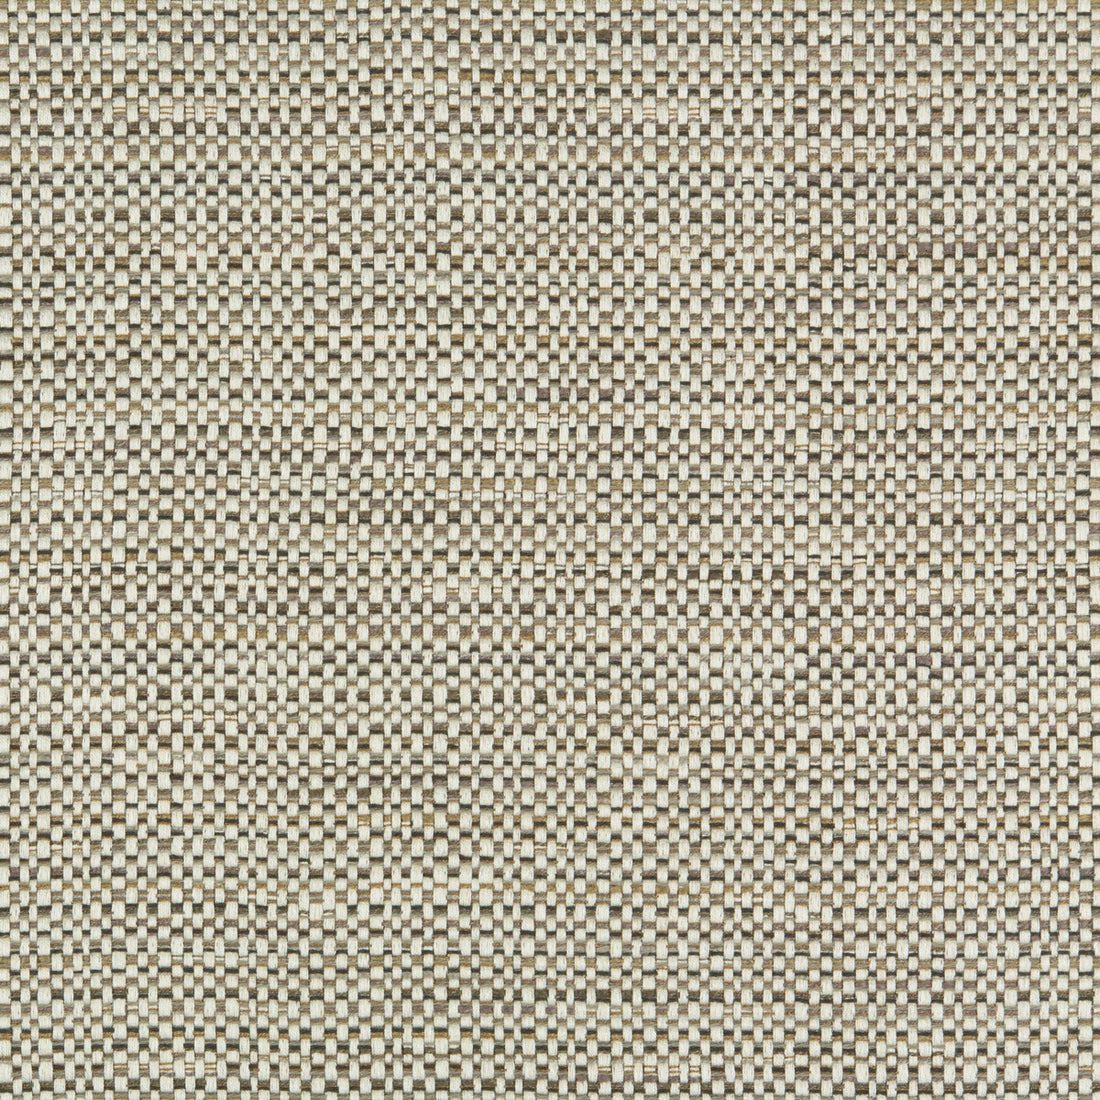 Kravet Design fabric in 34999-11 color - pattern 34999.11.0 - by Kravet Design in the Performance Crypton Home collection